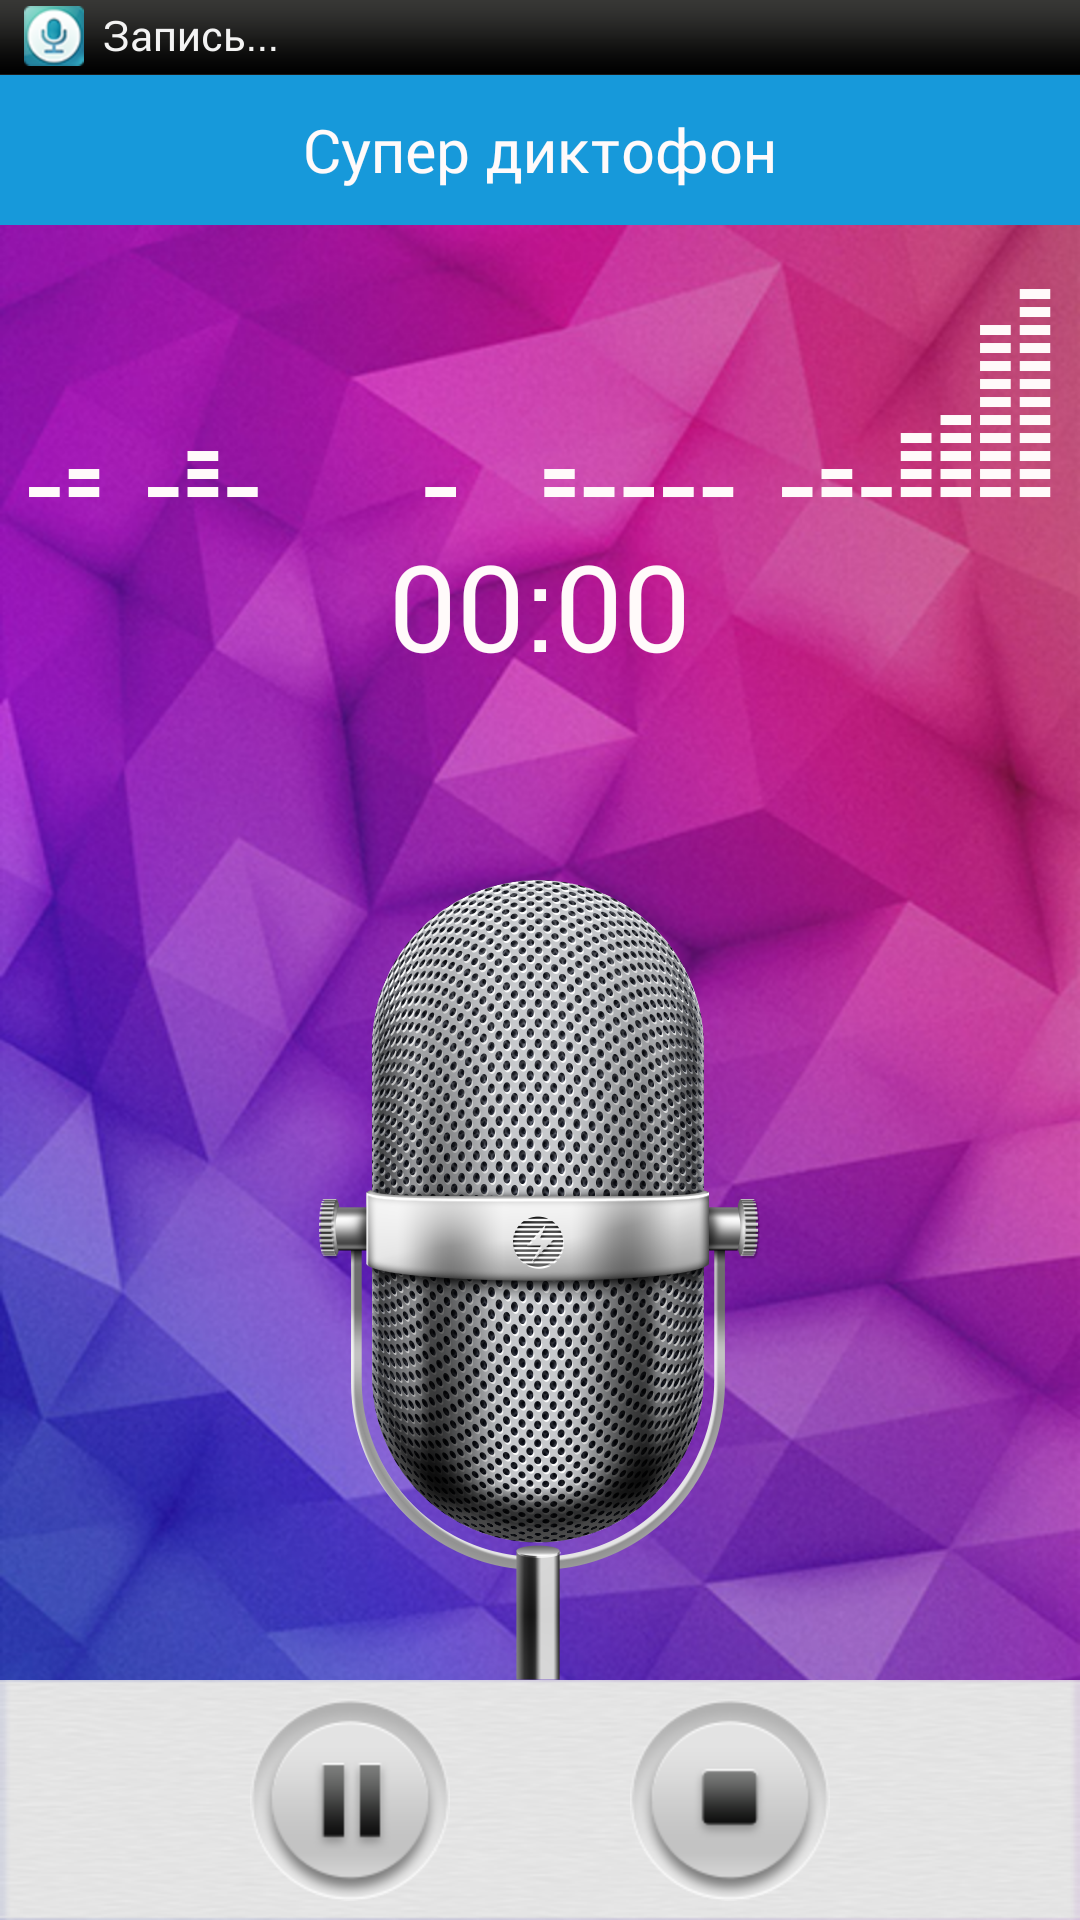 Android application Super Voice Recorder screenshort